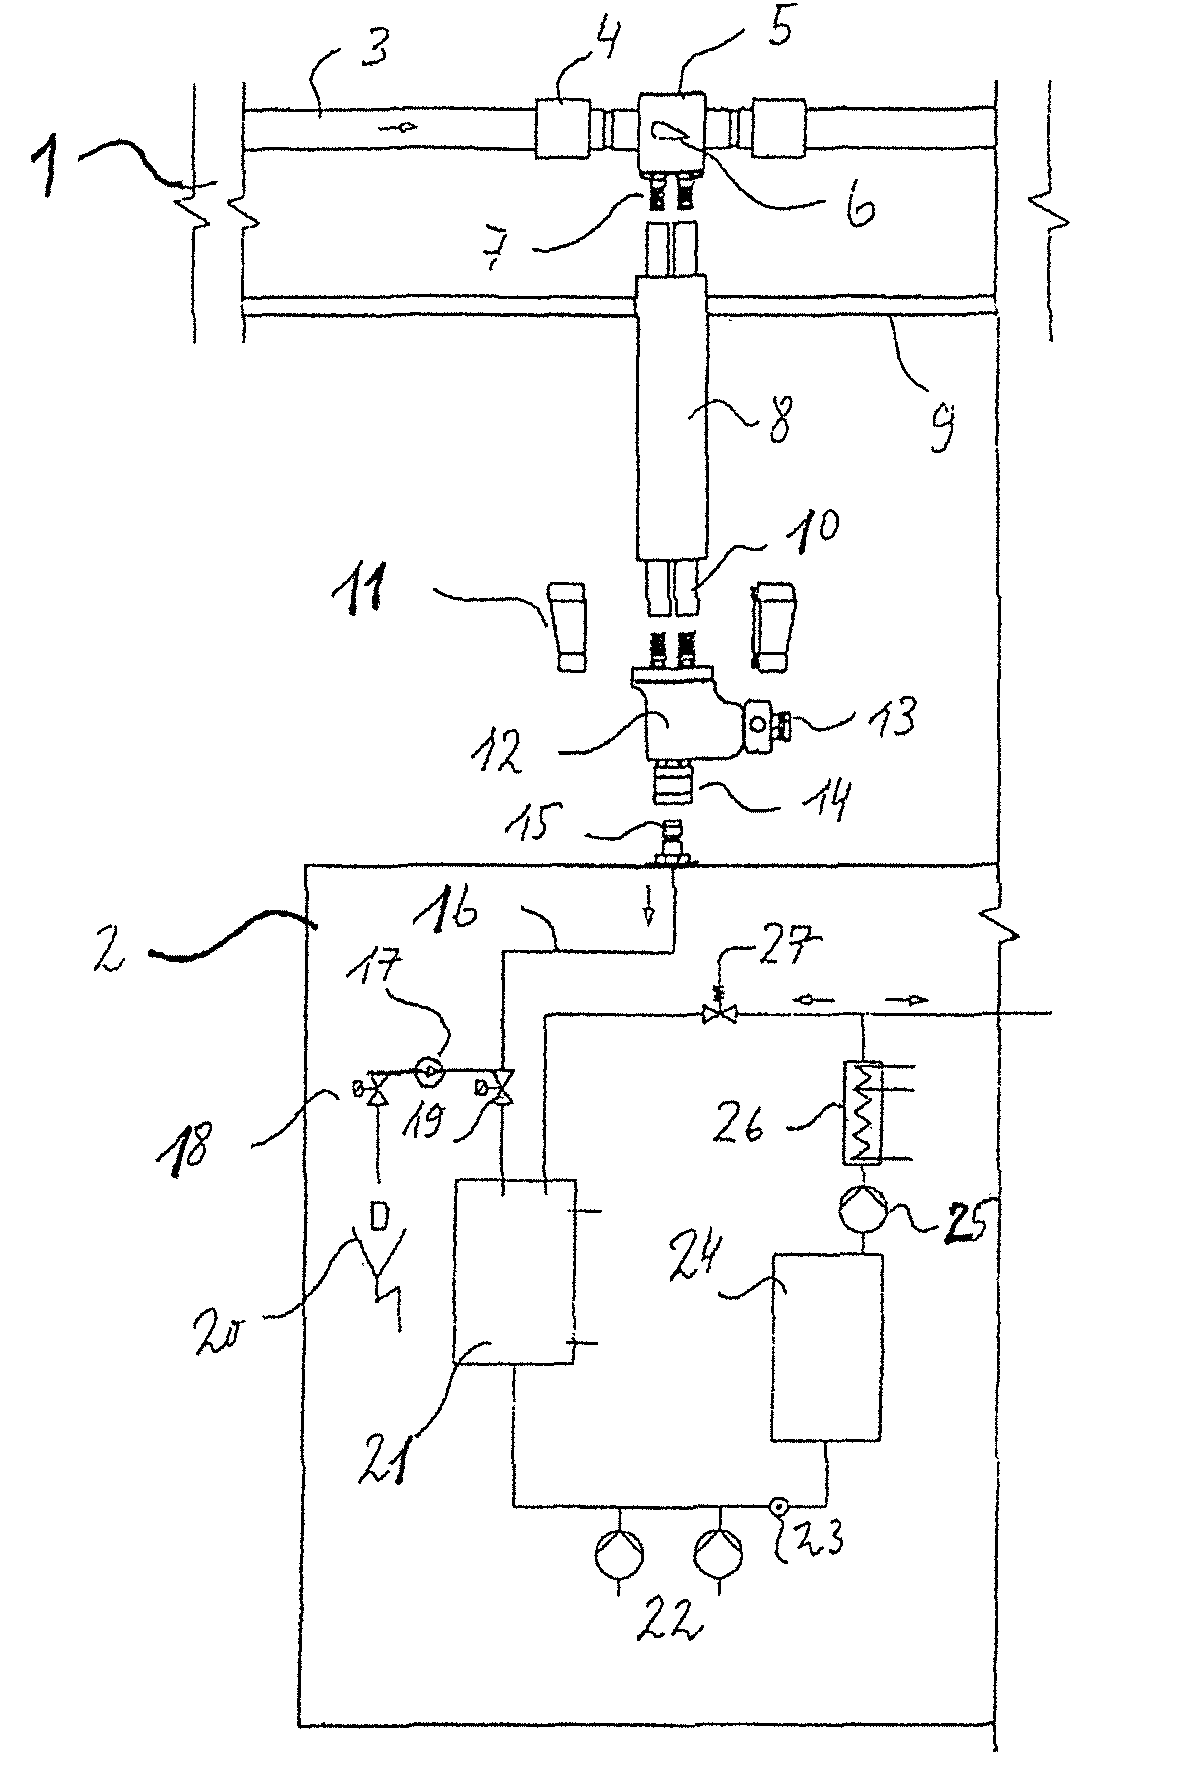 Fluid system for supplying a device with highly pure liquid